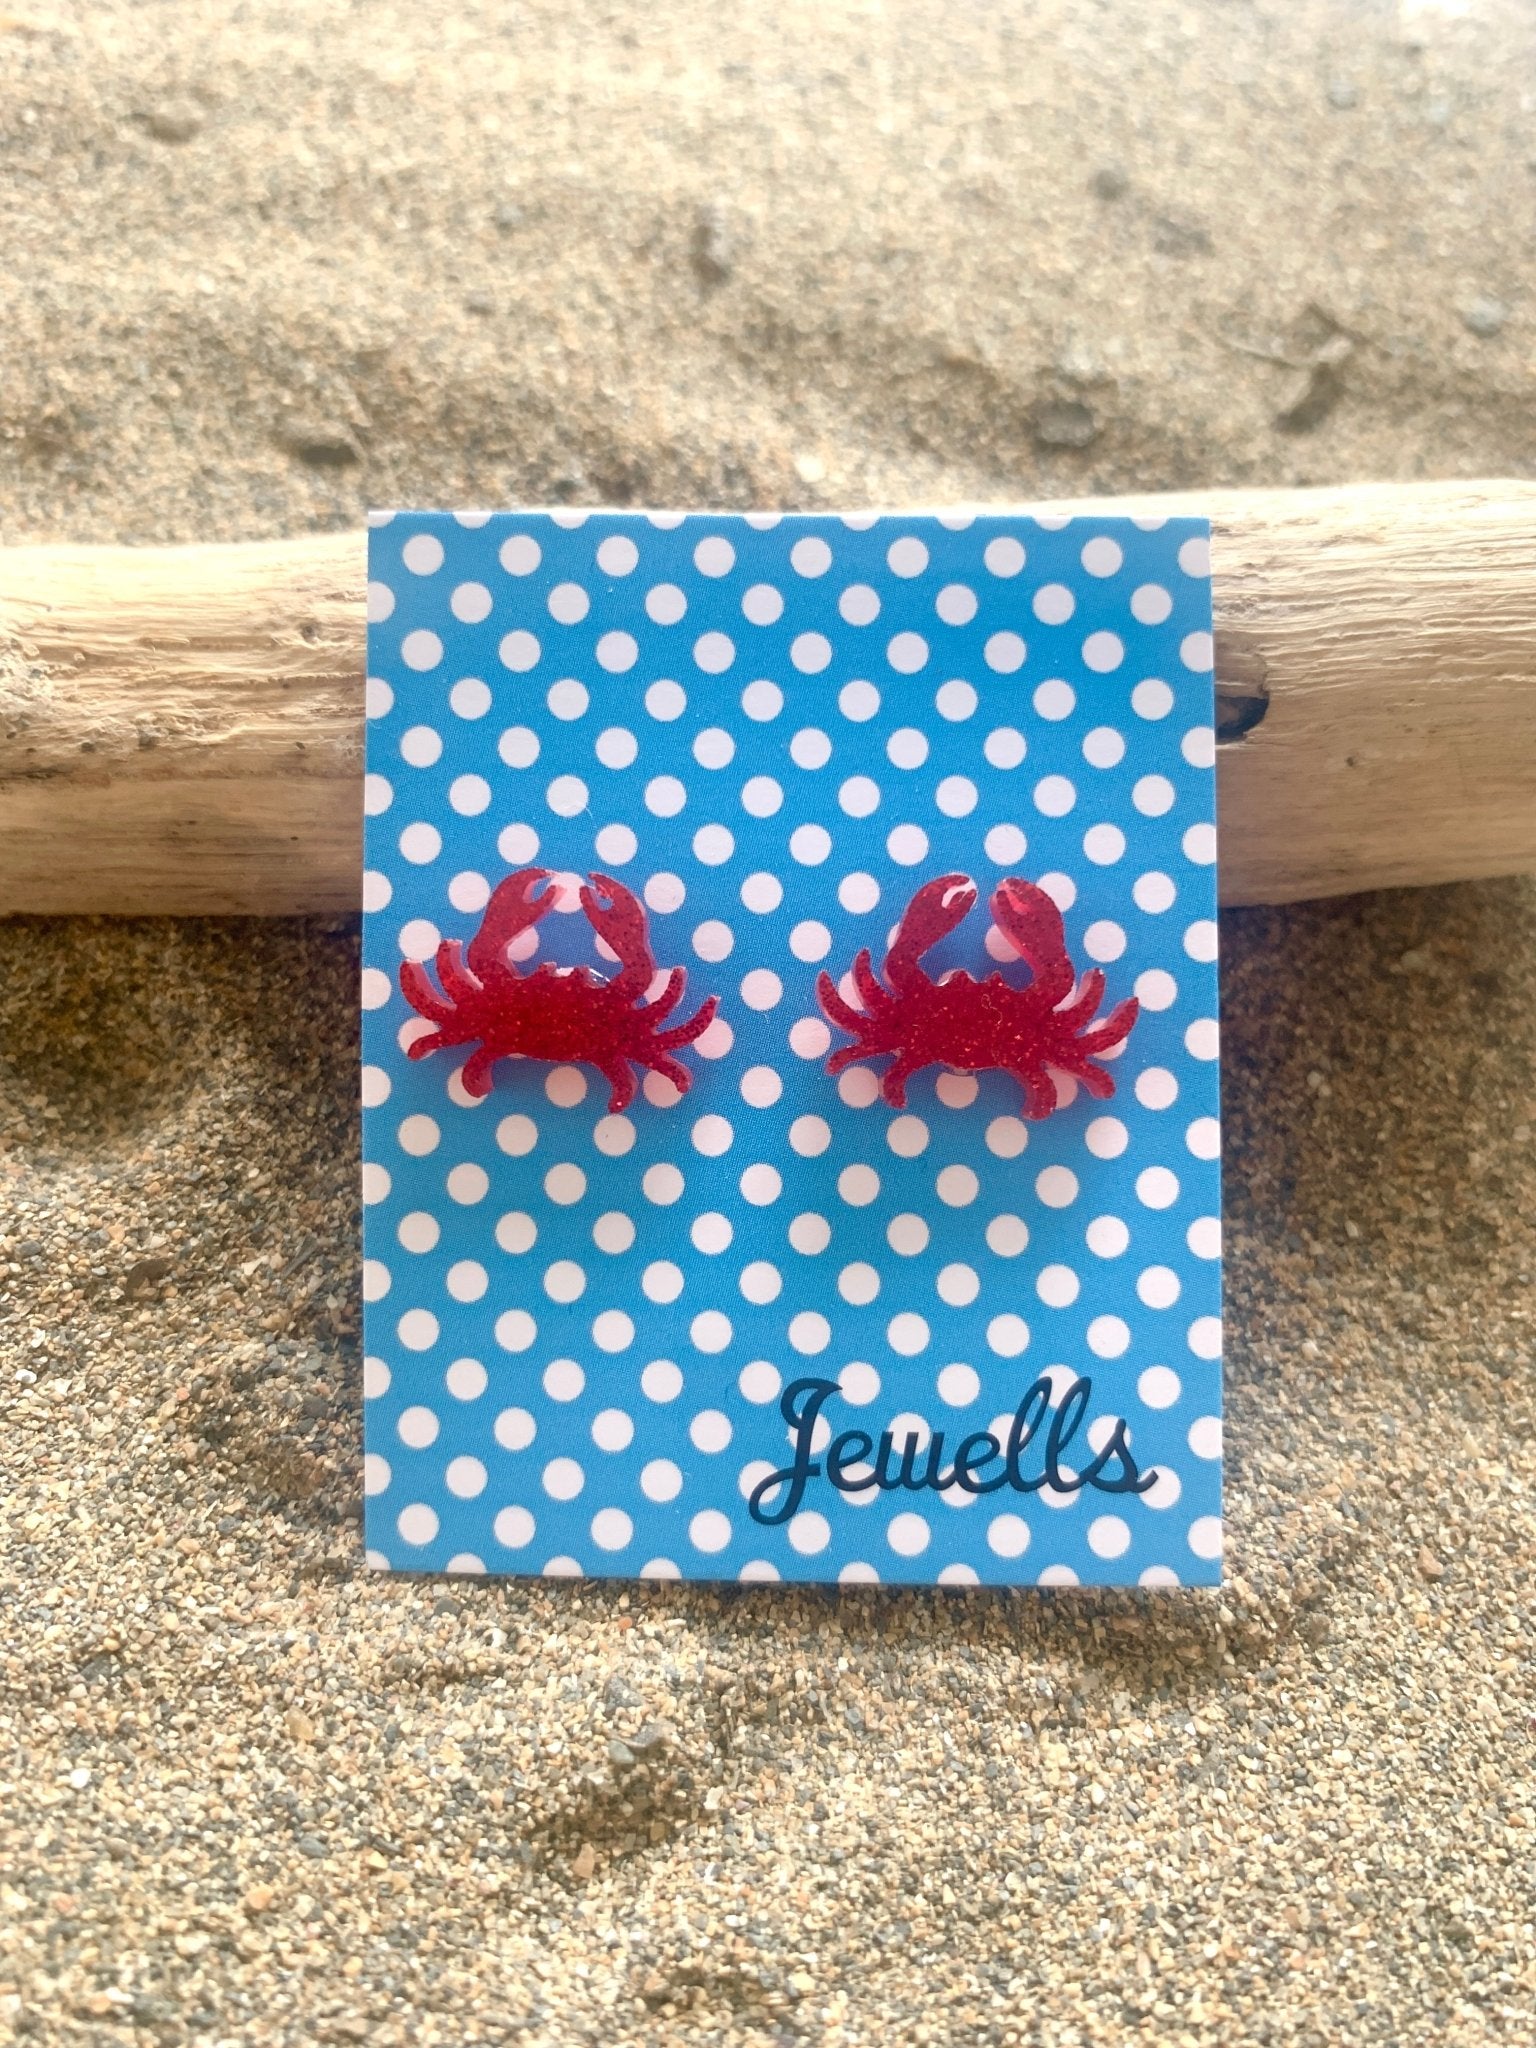 Sparkly Sea Creature Stud Earrings: Lobster, Crab or Whale - Readymoney Beach Shop